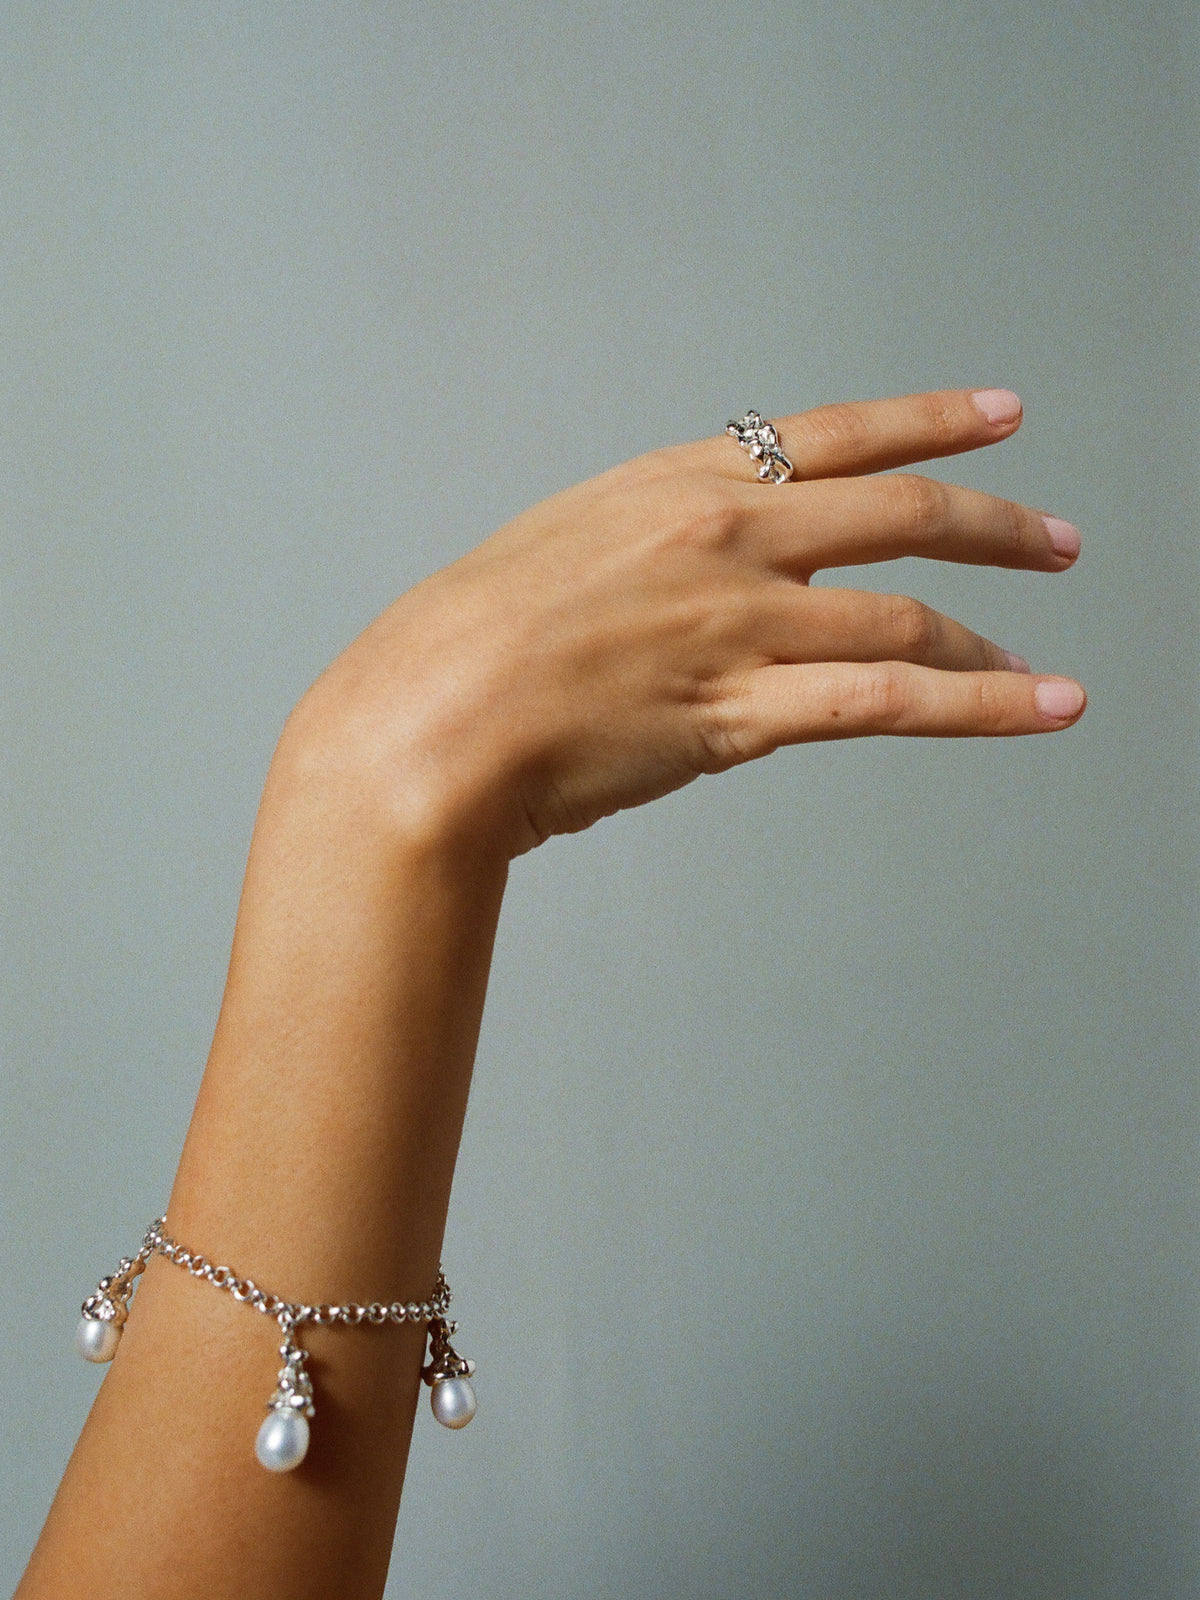 FARIS SOPHIA Charm Bracelet in sterling silver, shown on model. Styled with LAVA Band 10mm in sterling silver